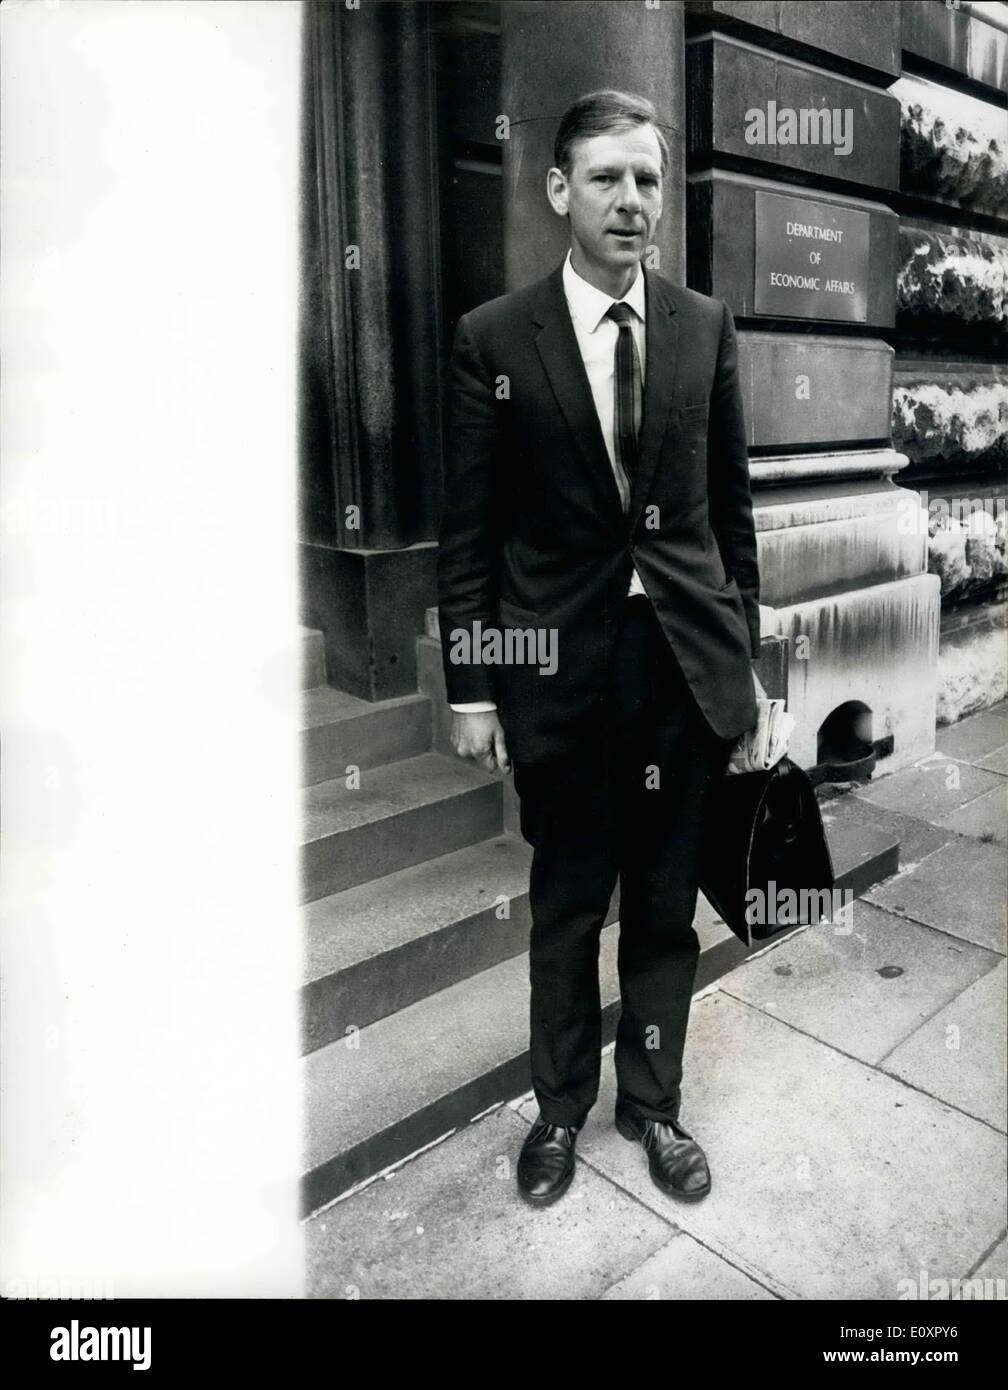 Aug. 08, 1967 - New Economics Minister; Photo Shows Mr. Peter Shore, the new Minister of Economic Affairs, pictured leaving the Stock Photo